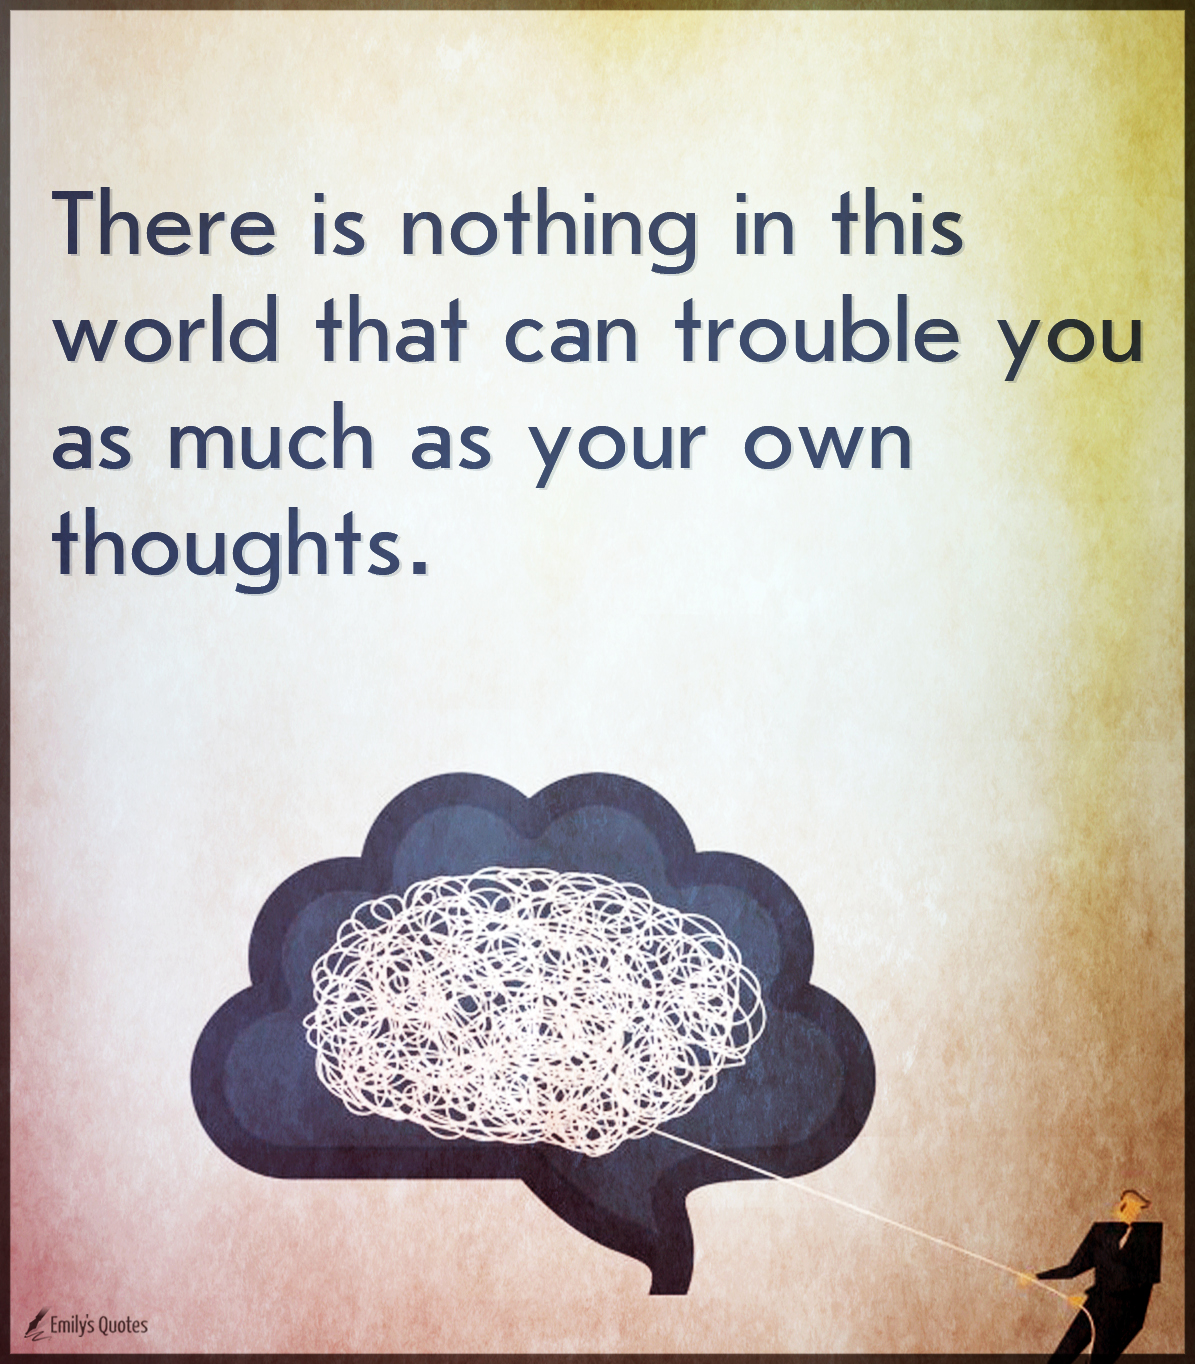 There is nothing in this world that can trouble you as much as your own thoughts